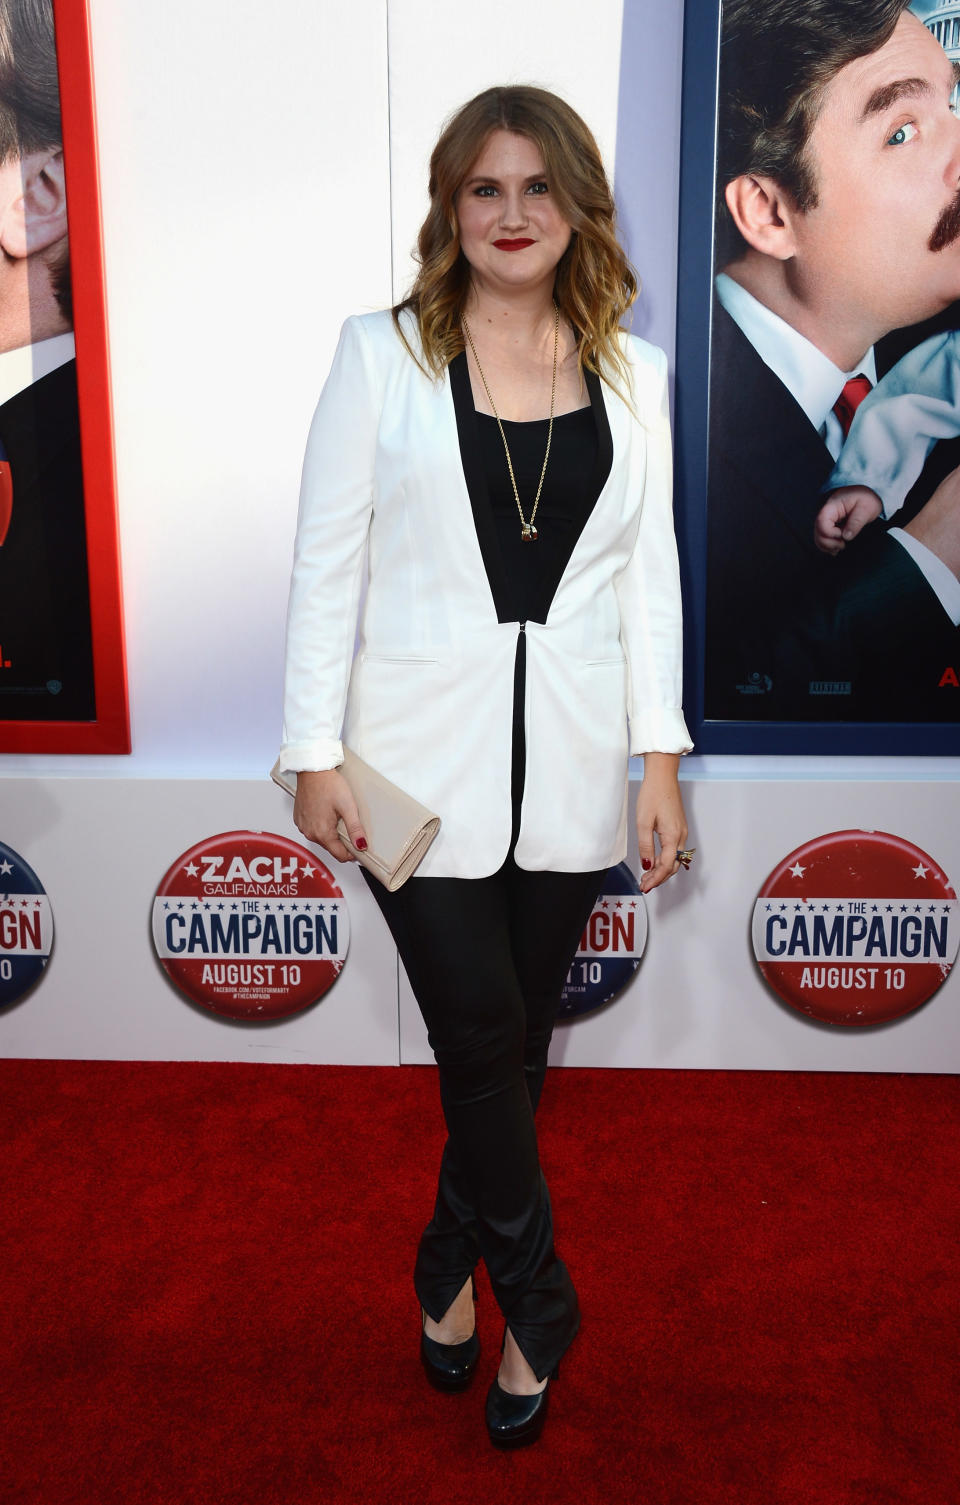 Jillian Bell attends the Los Angeles premiere of "The Campaign" on August 2, 2012.